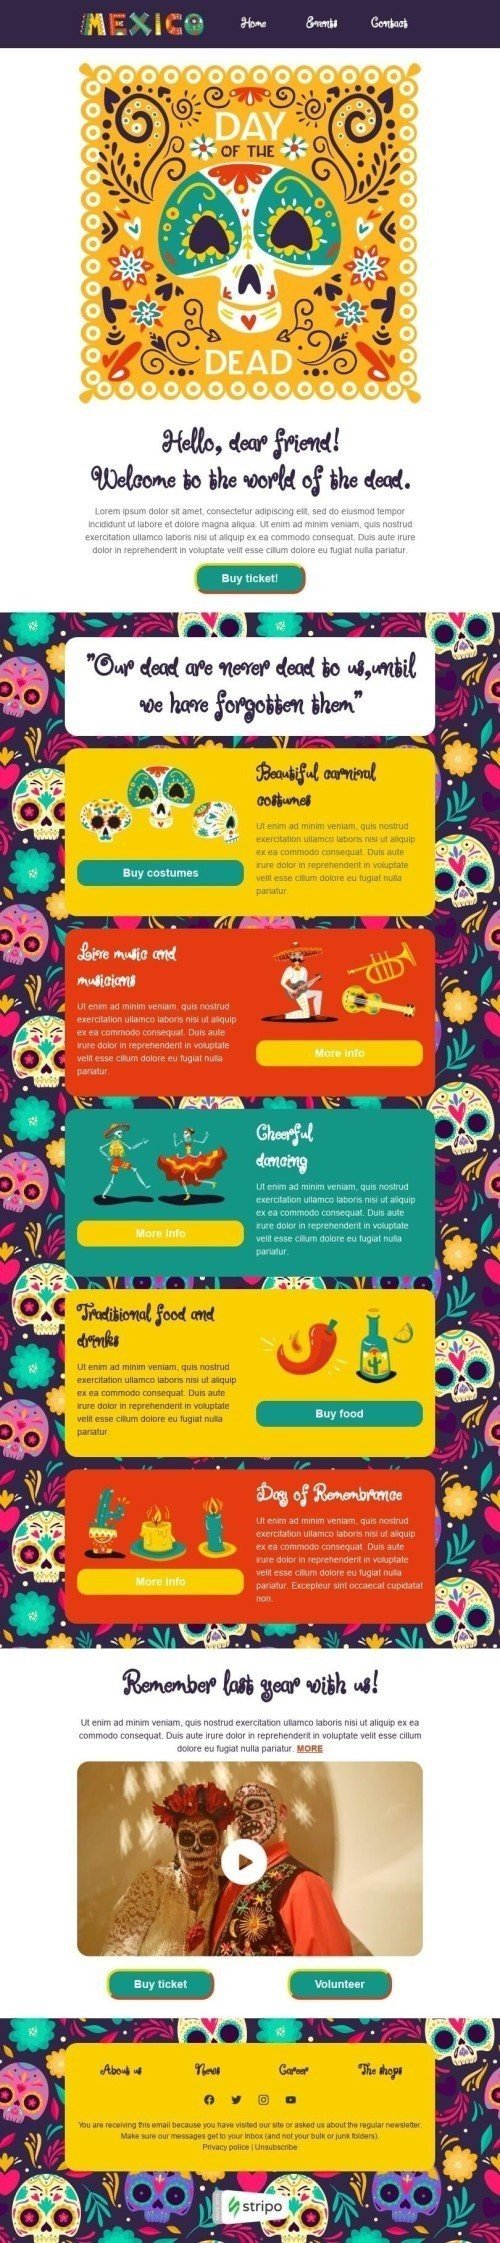 Day of the Dead Email Template "Our dead are never dead to us" for Hobbies industry desktop view